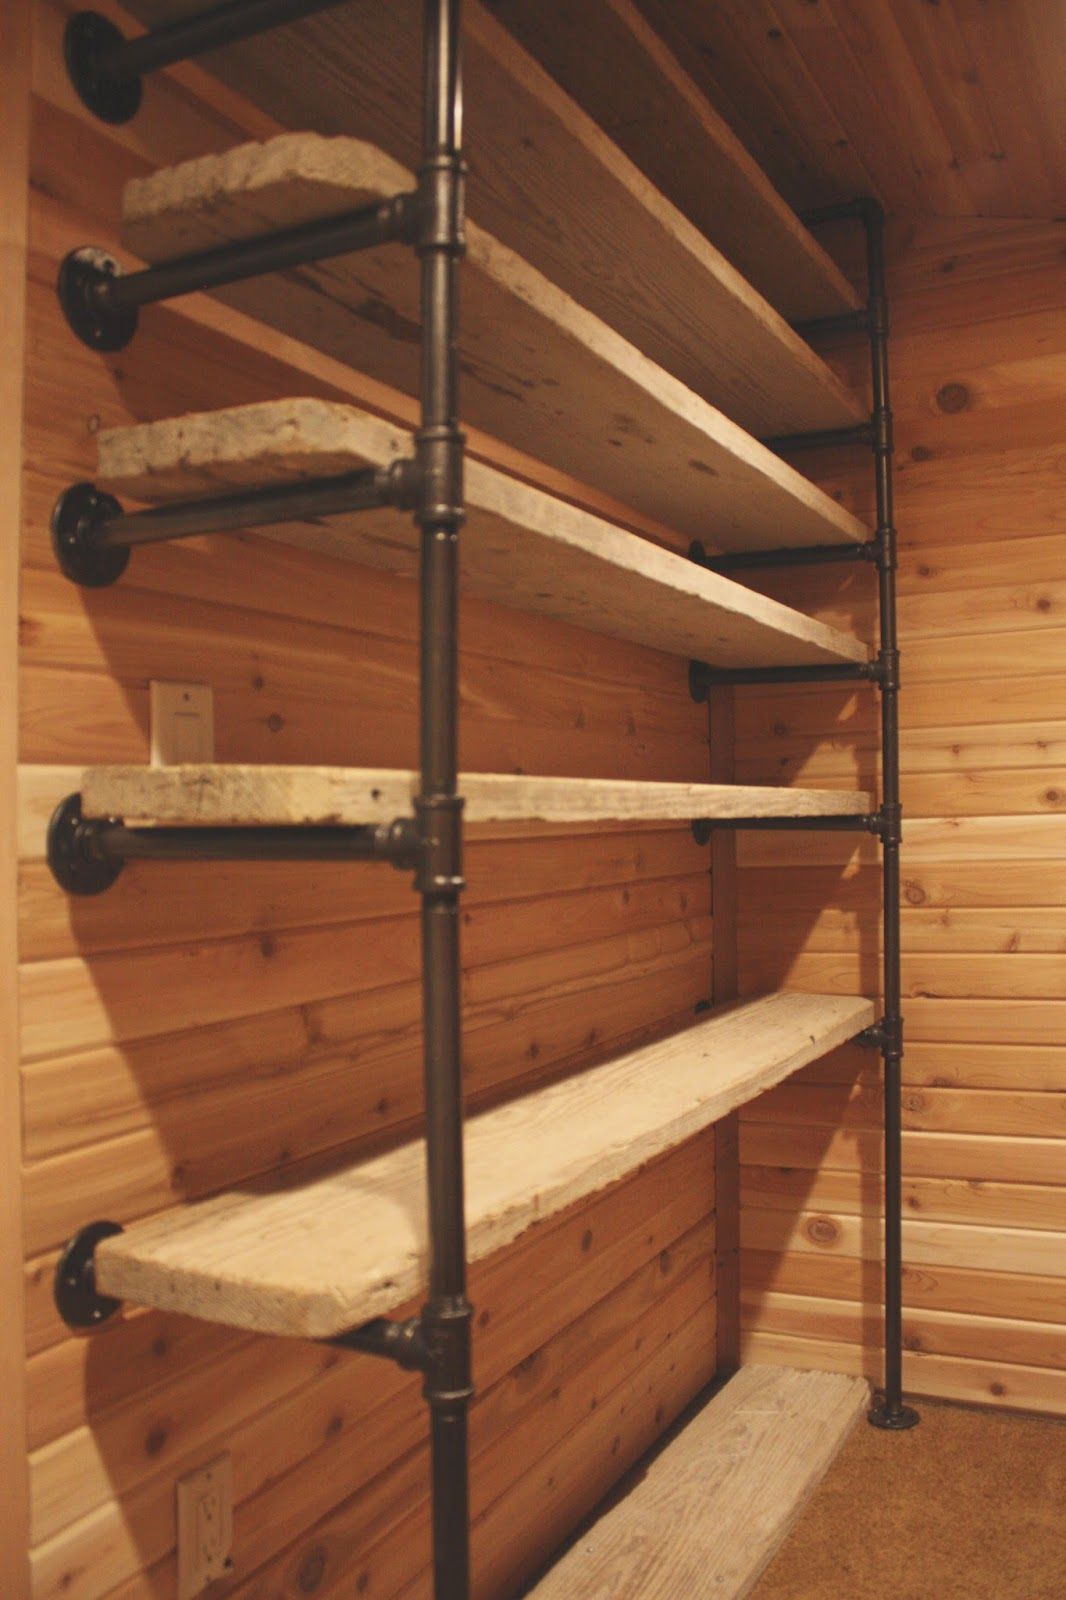 Pipes and reclaimed wood turned into closet shelves